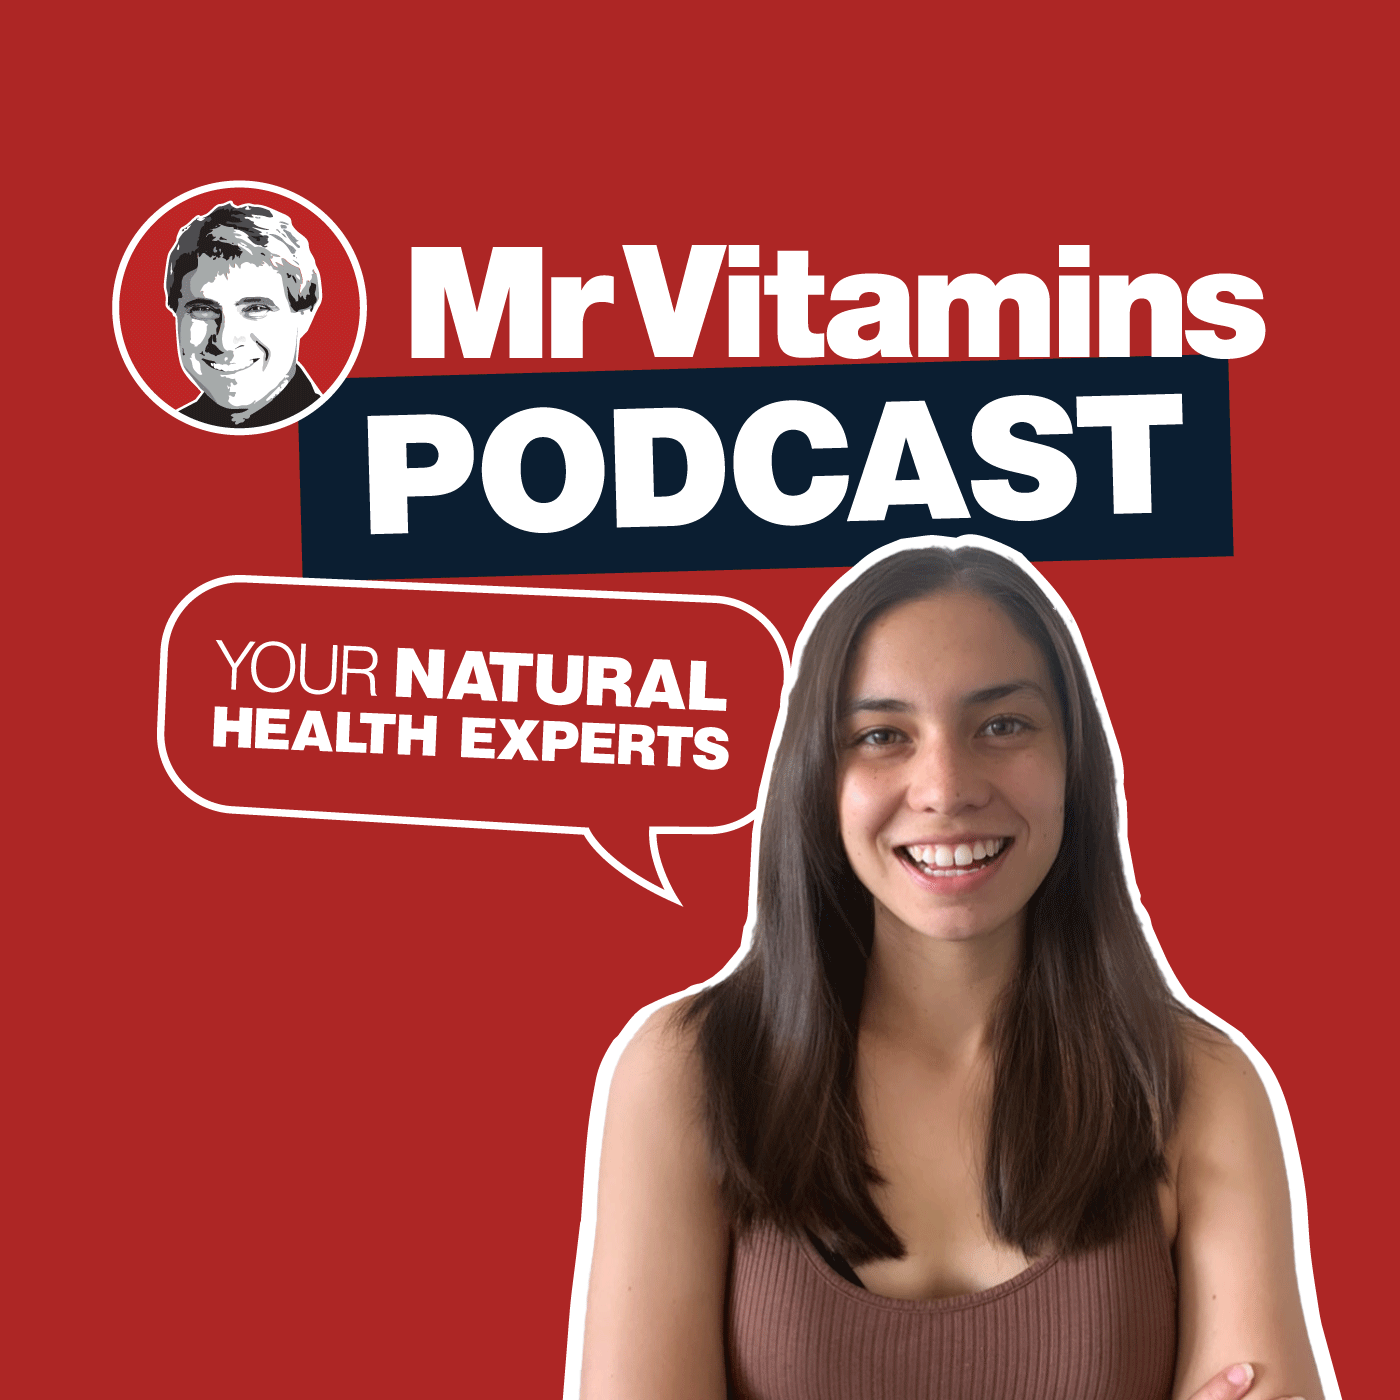 Mr Vitamins Podcast - Stay Well and Live Smarter This Summer